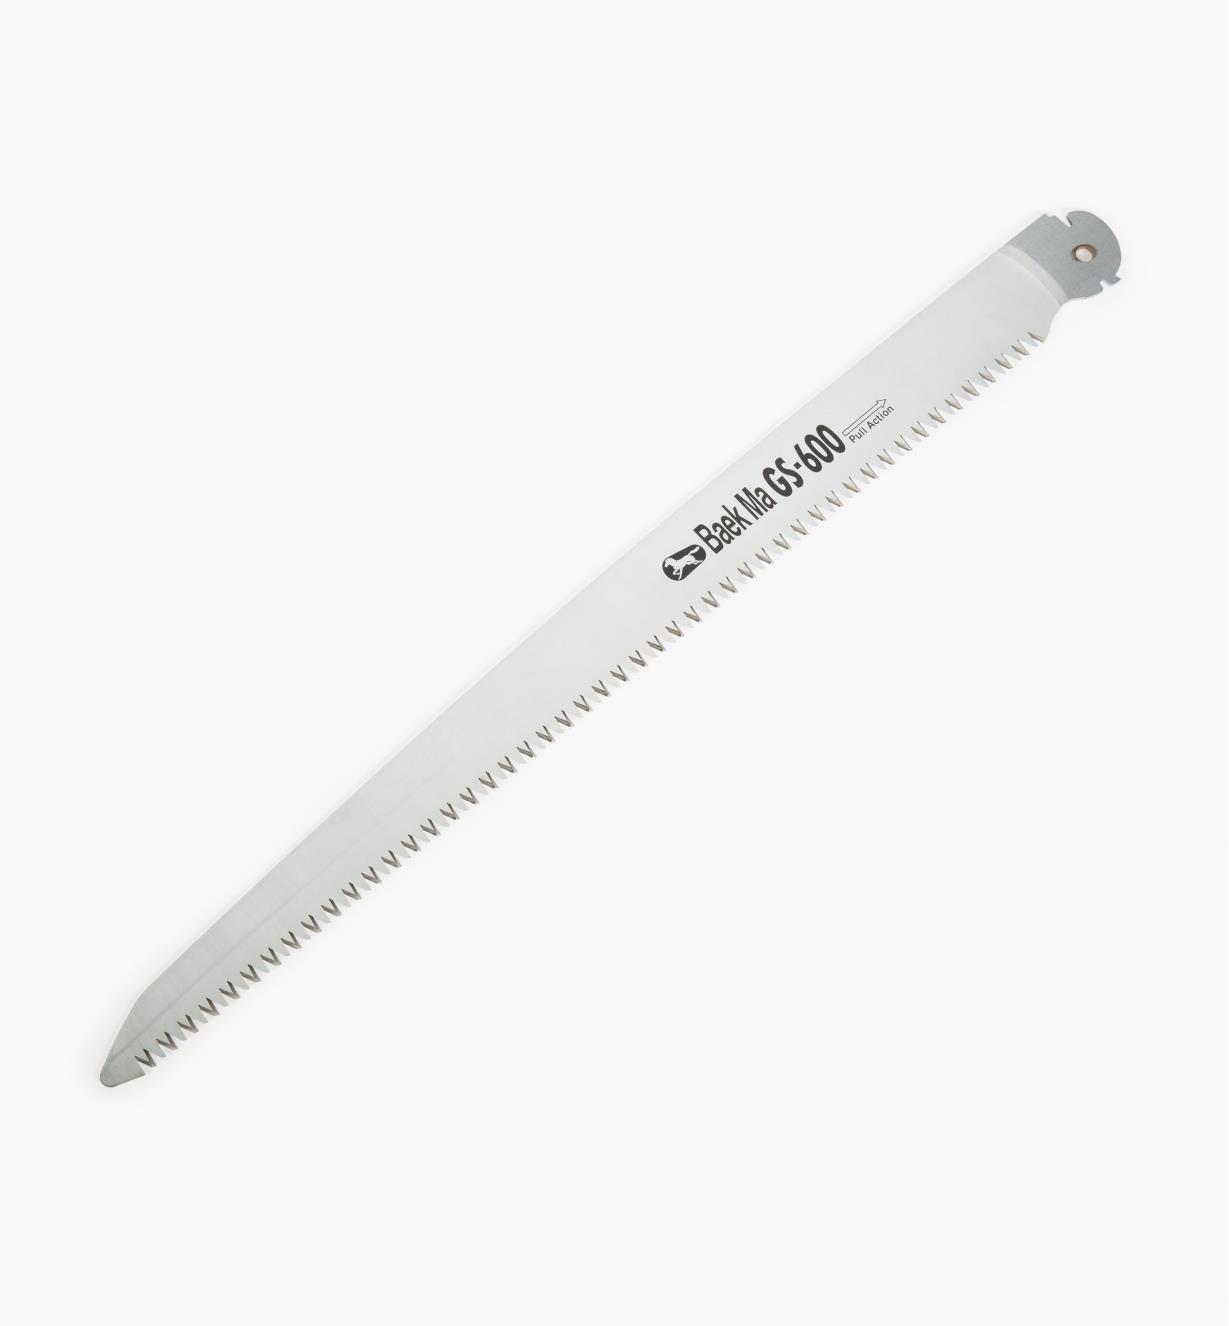 PB341 - Replacement Blade for Folding Trail Saw